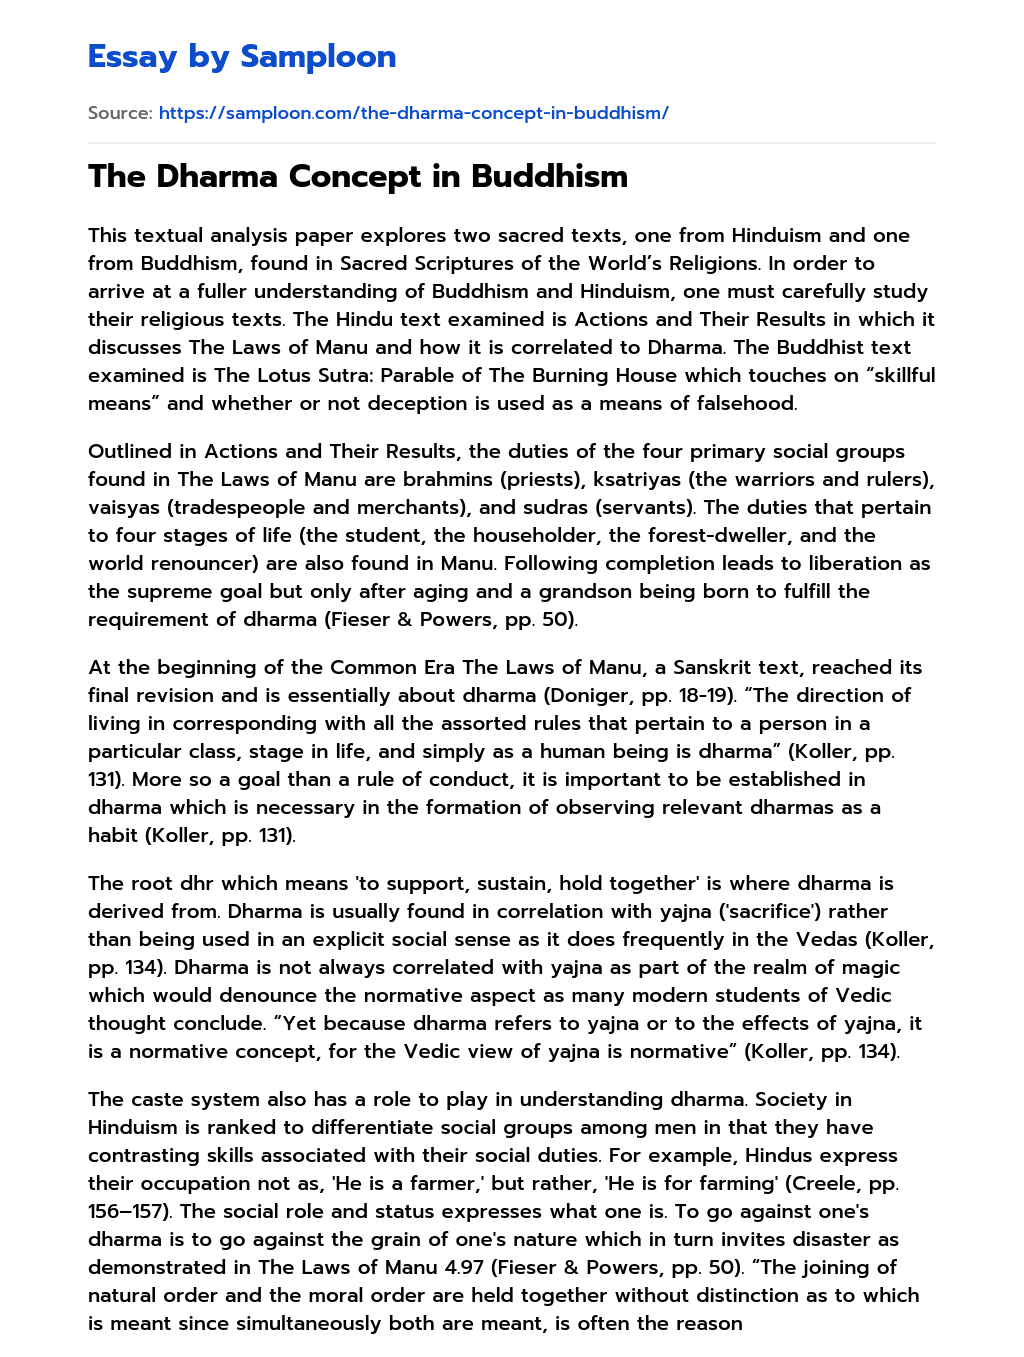 The Dharma Concept in Buddhism essay